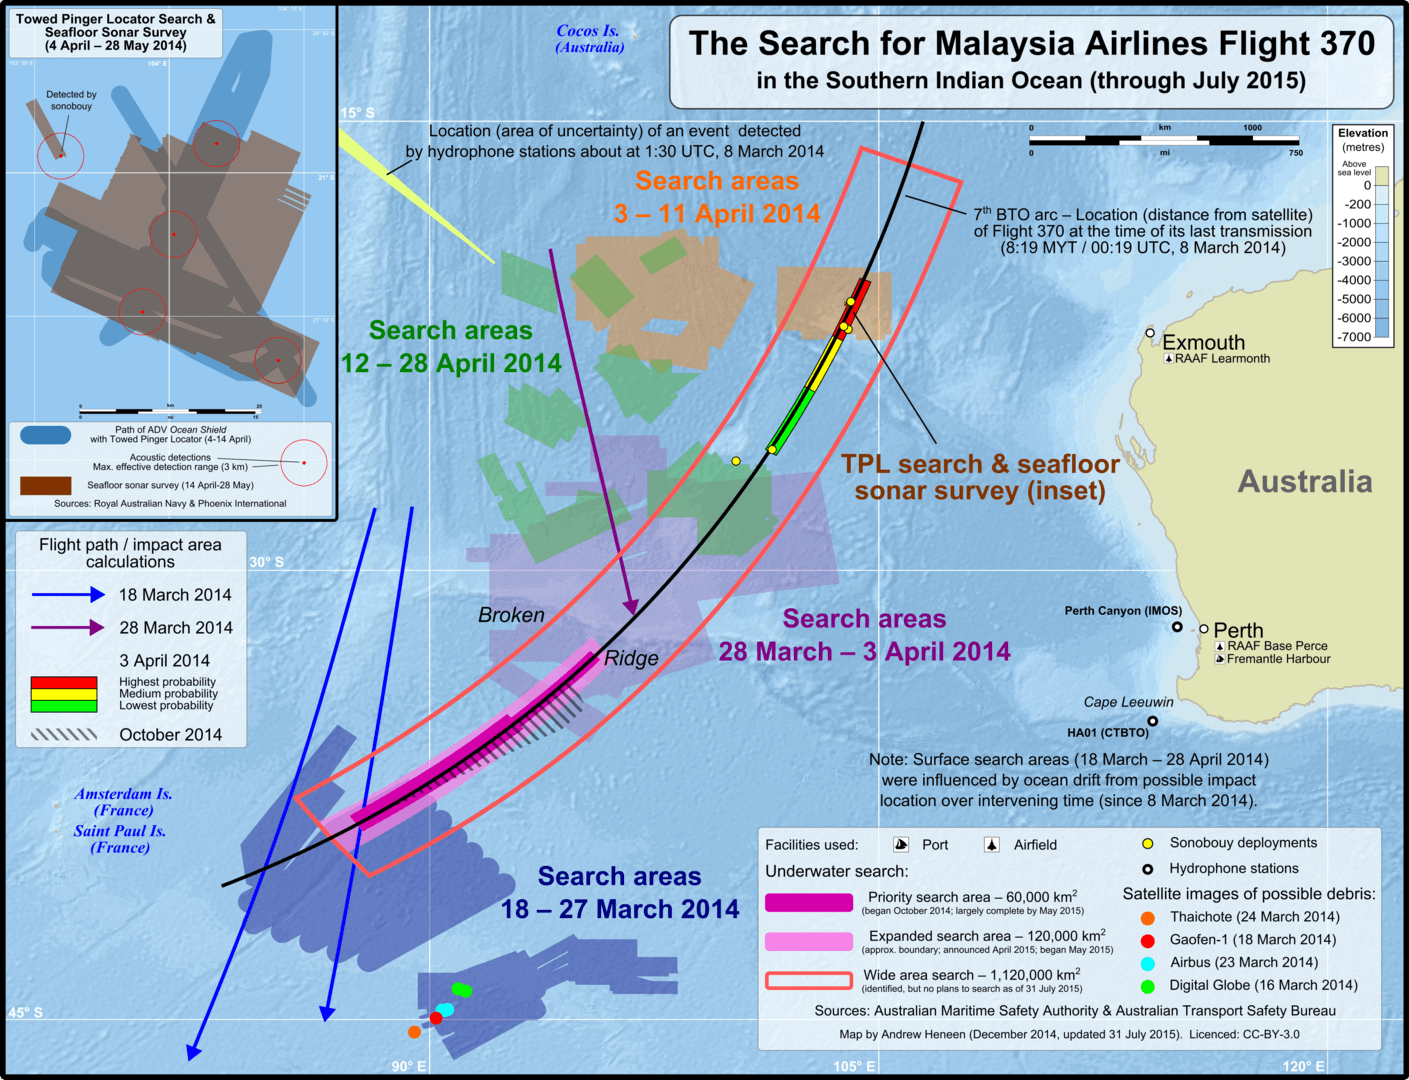 Search for MH370 in Southern Indian Ocean